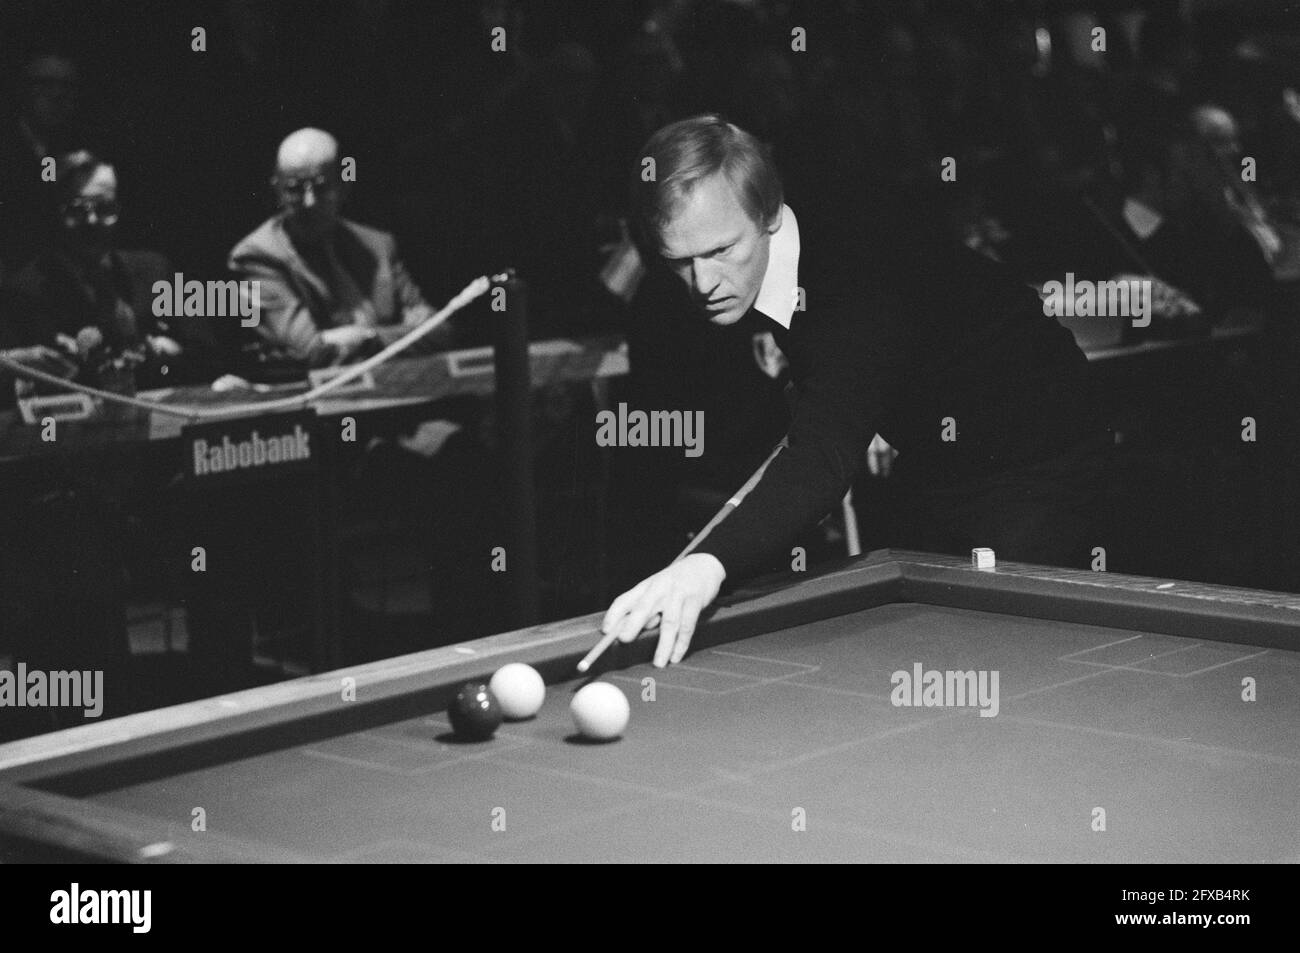 European Championship 47/1 billiards in Heeswijk Dinter, Vultink in action, December 16, 1977, BILJARTEN, The Netherlands, 20th century press agency photo, news to remember, documentary, historic photography 1945-1990, visual stories, human history of the Twentieth Century, capturing moments in time Stock Photo